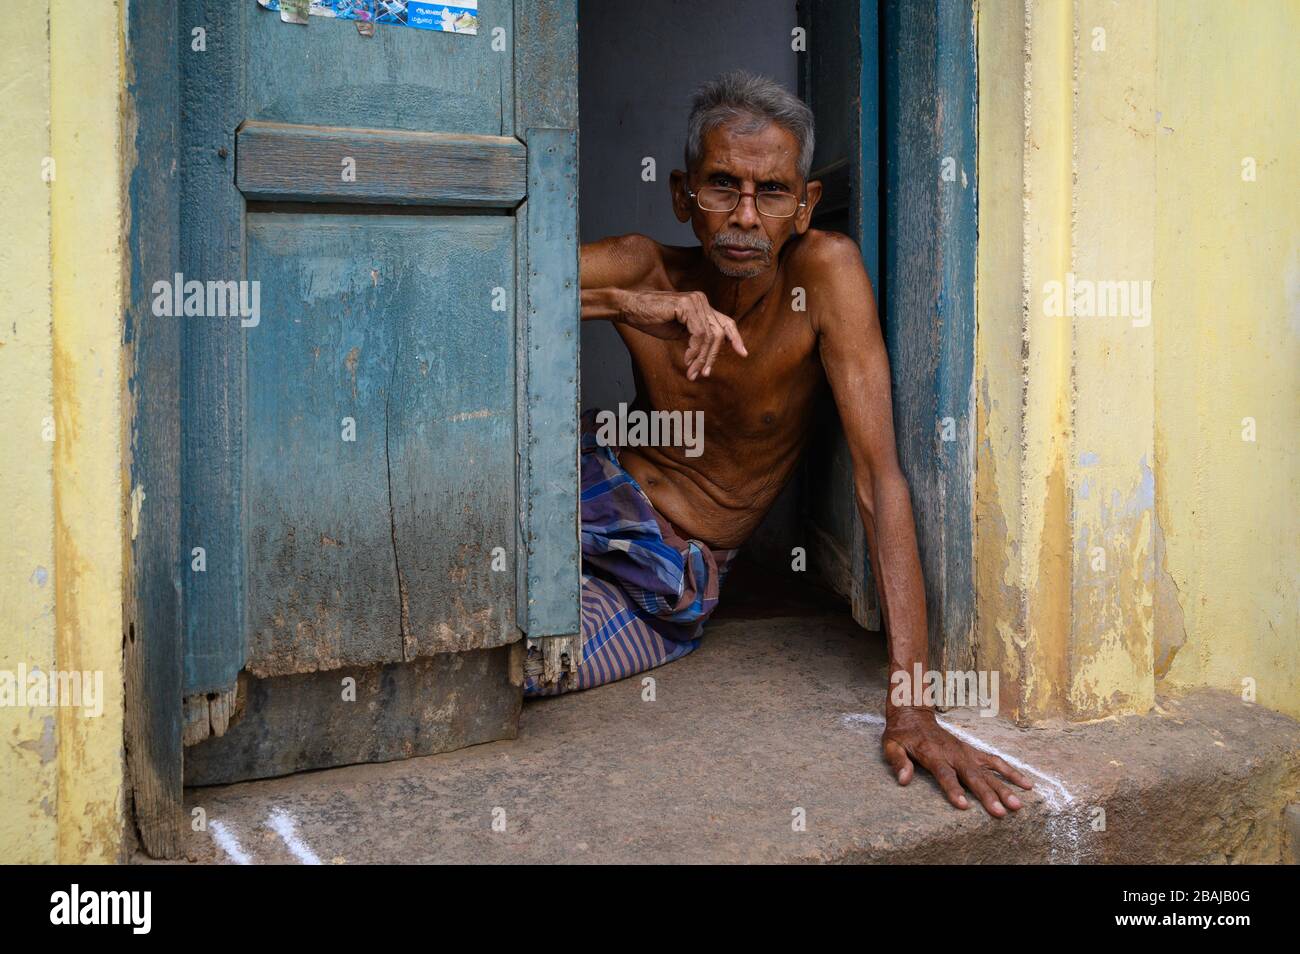 Portrait of a middle-aged man in the doorway of his home,  Madurai, India Stock Photo